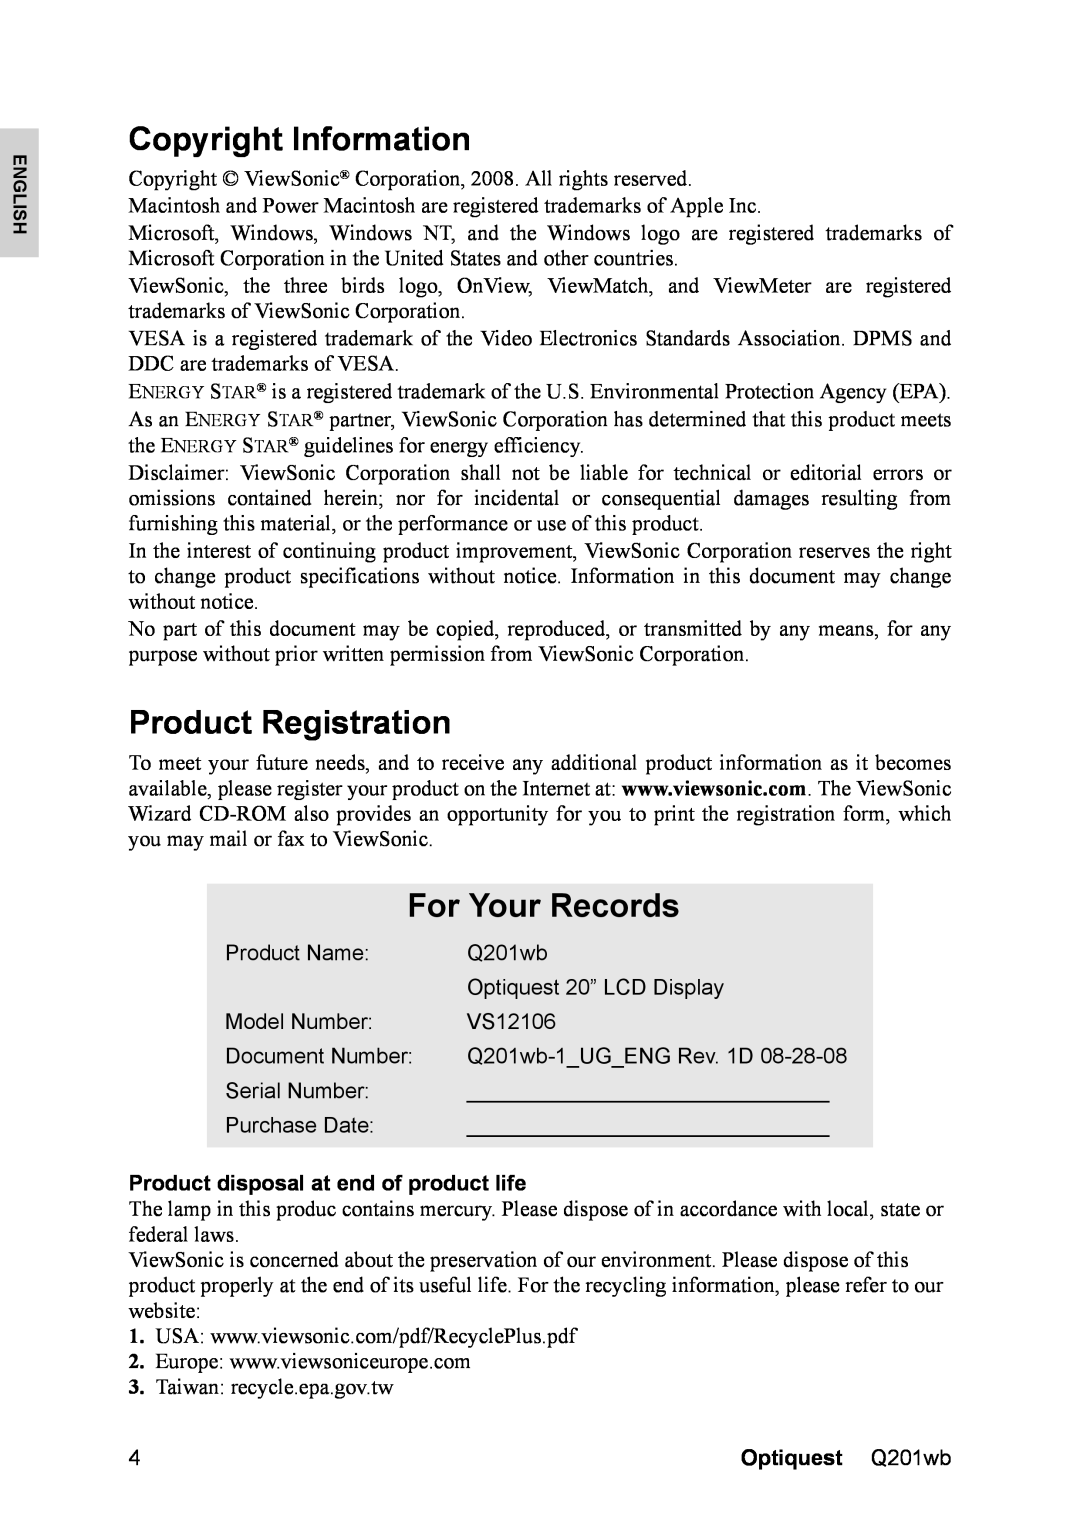 ViewSonic VS12106 Copyright Information, Product Registration, For Your Records, Product disposal at end of product life 